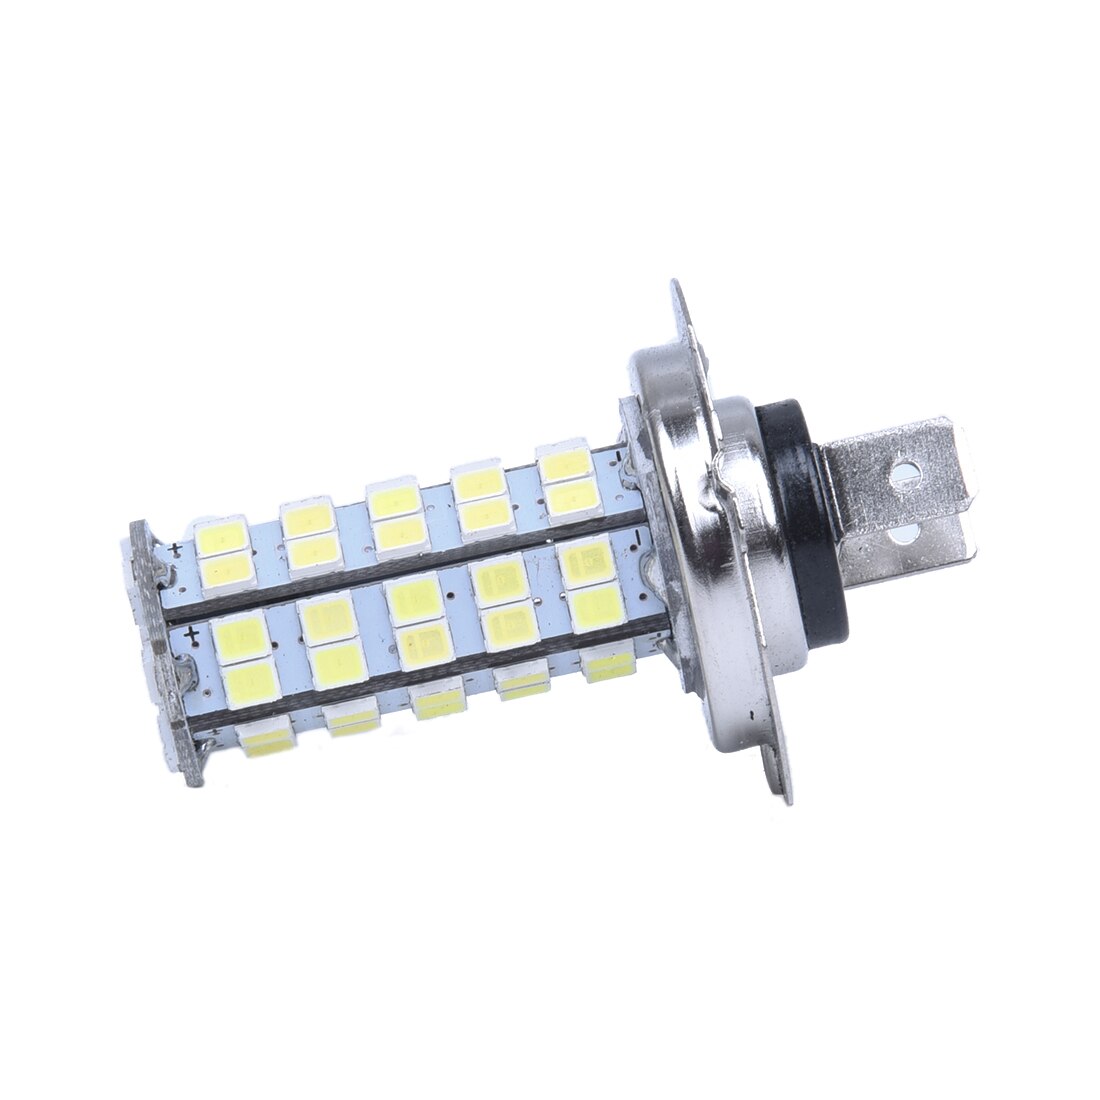 Lamp H7 3528 Smd 68 Led Wit 12V Voor Auto